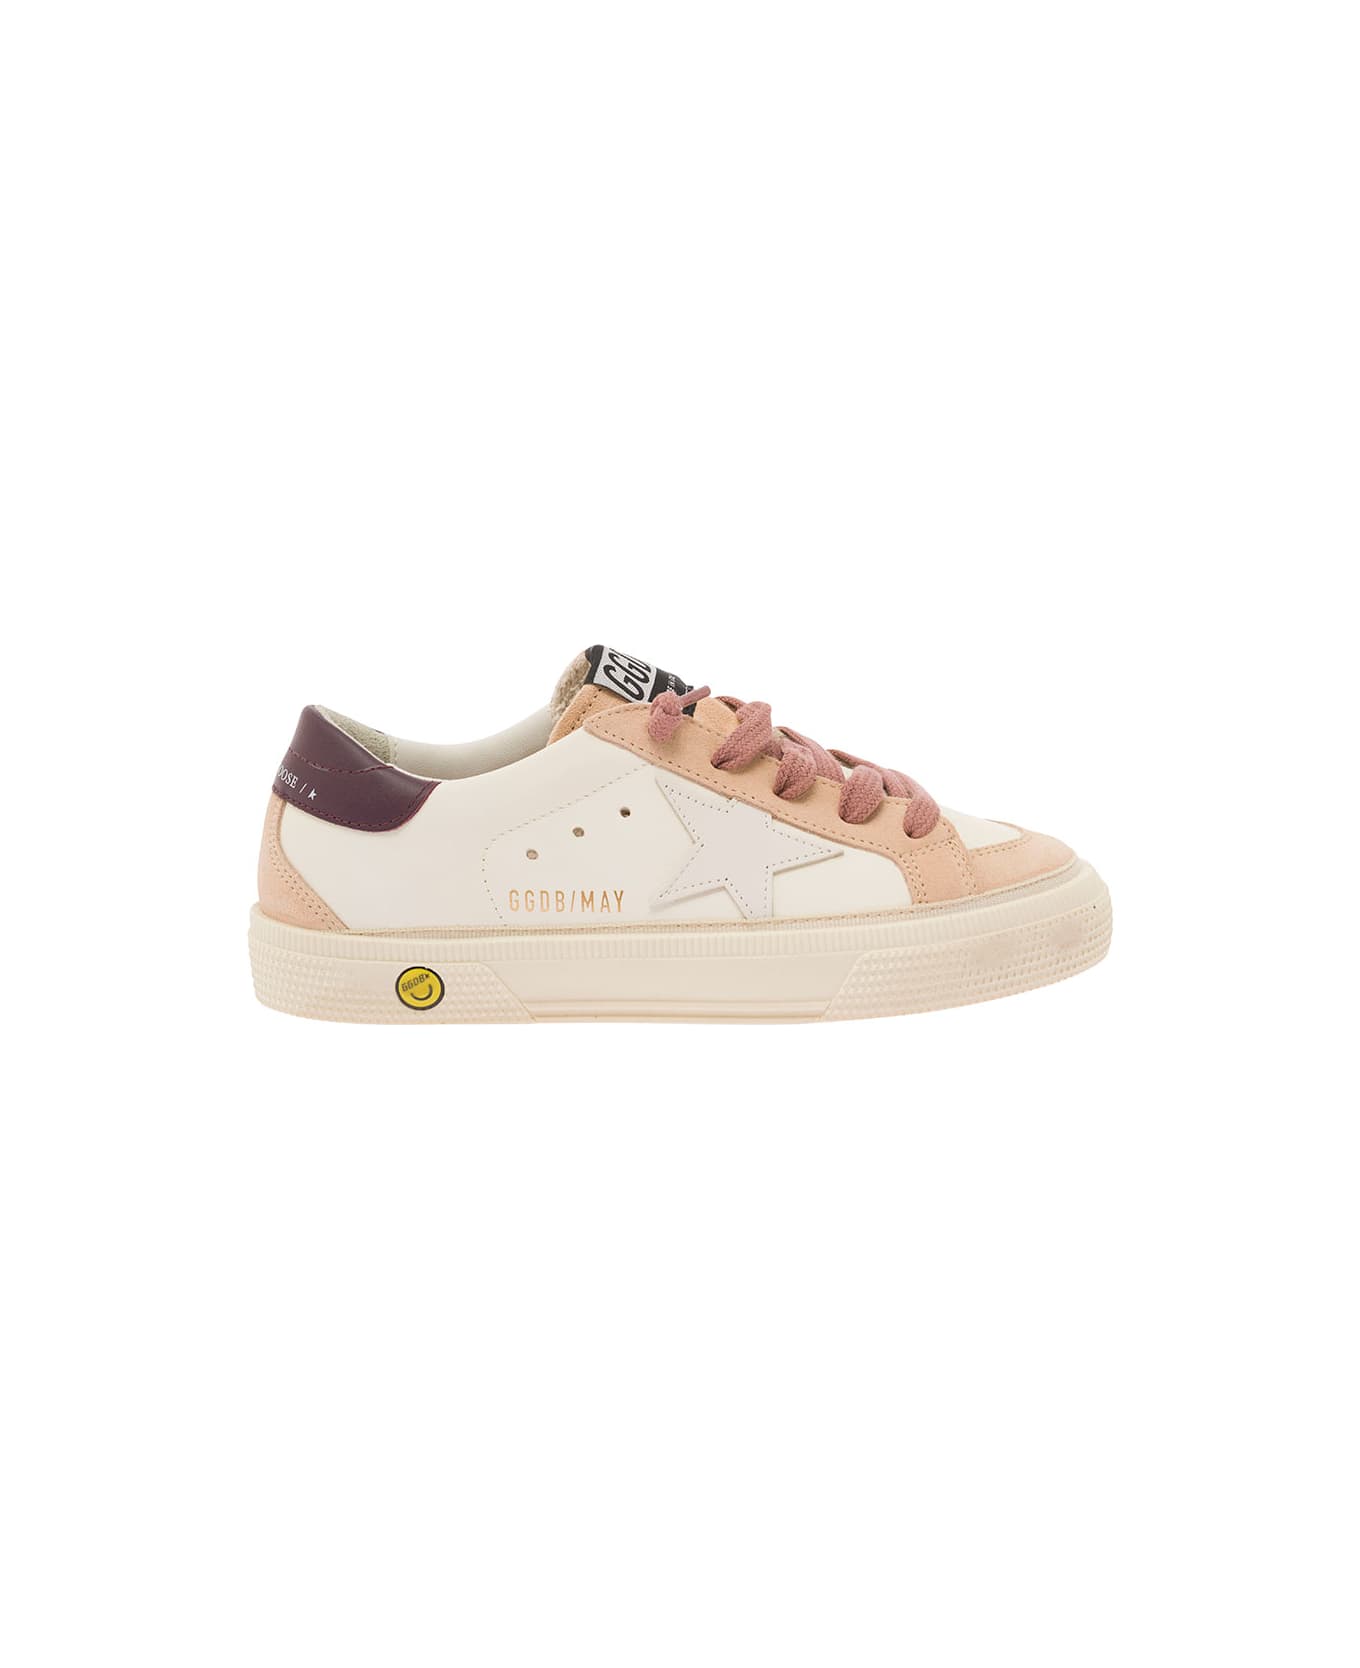 Golden Goose May Leather Upper Star And Heel Suede Toe And Spur Include Il Codice Gyf00604 | F004879 -82413 Dal 28 Al 35 - Beige